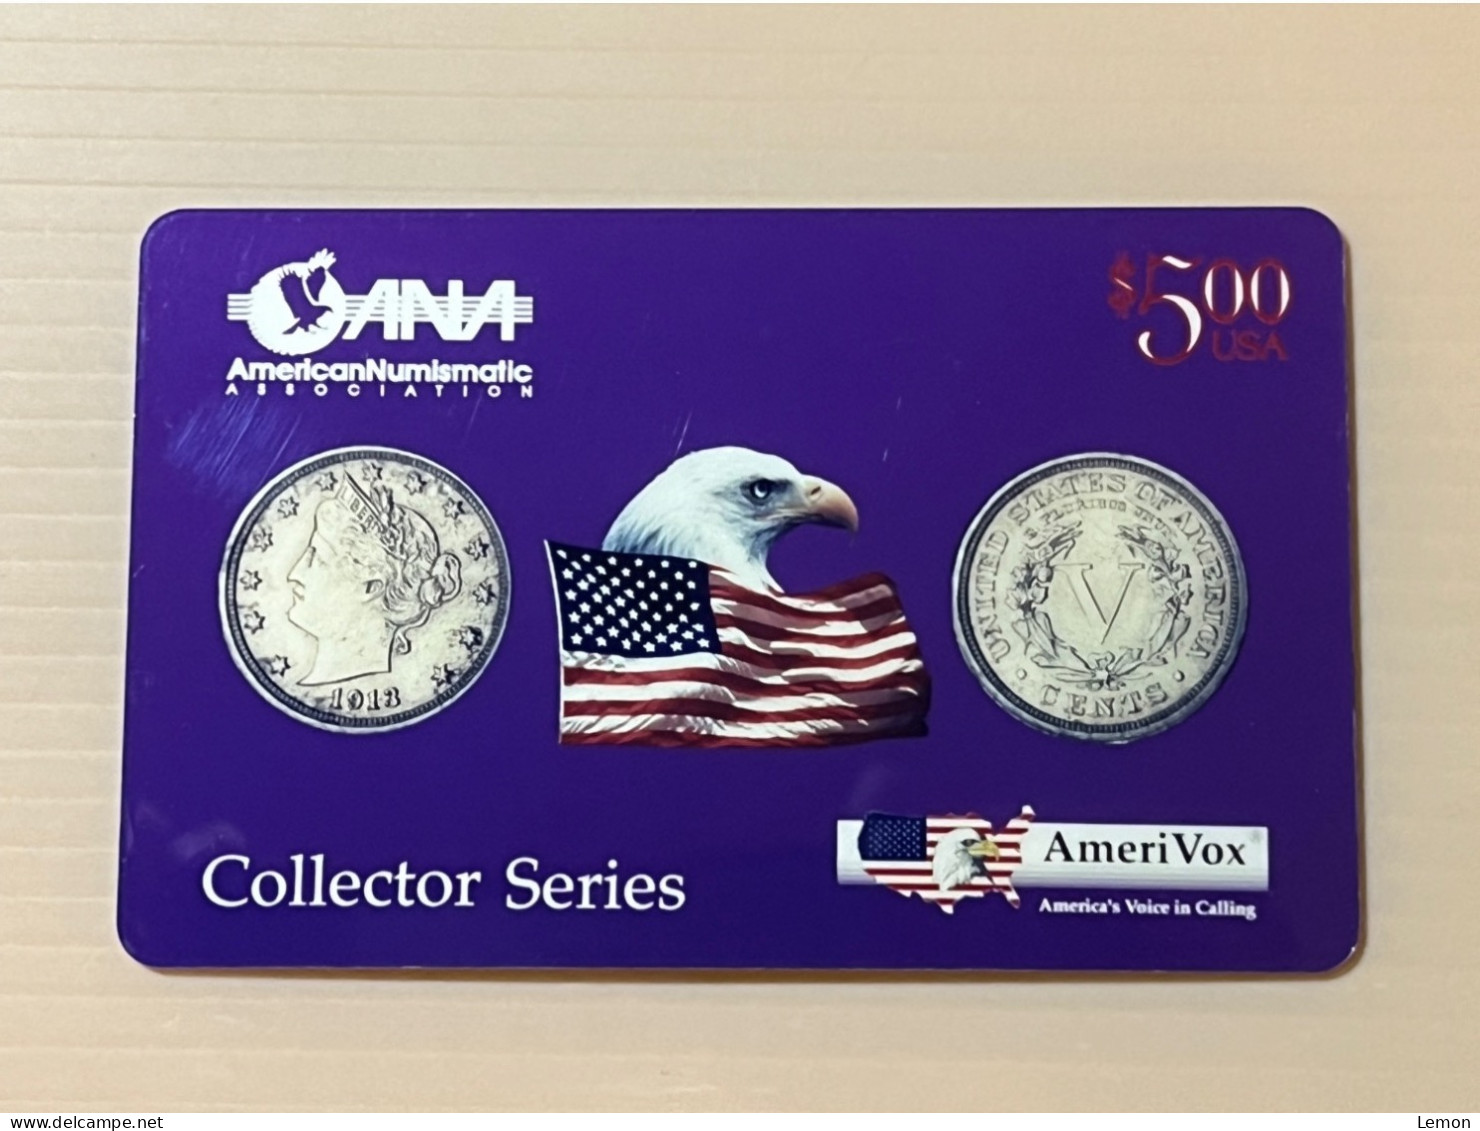 Mint USA UNITED STATES America Prepaid Telecard Phonecard, Liberty Head Nickel Coin Flag Eagle, Set Of 1 Mint Card - Collections